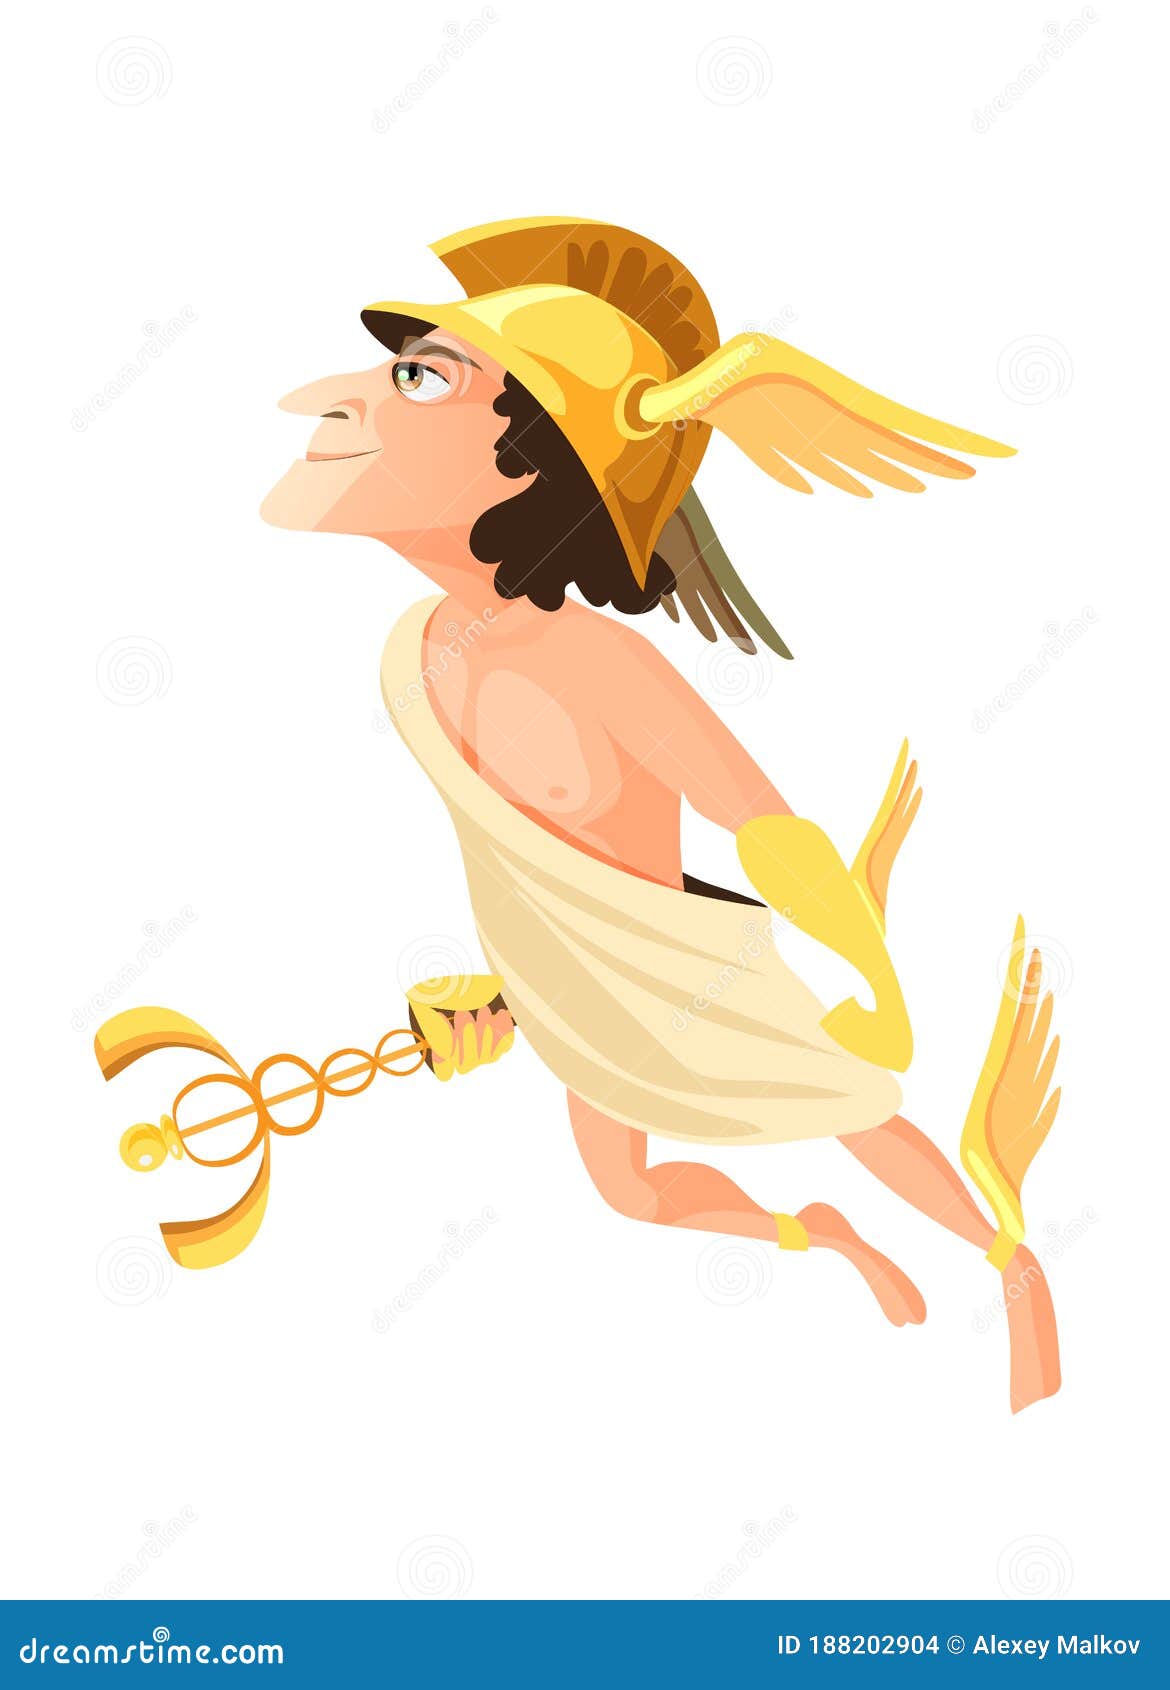 Hermes (Mercury) With Caduceus And Pound Sign Stock Photography